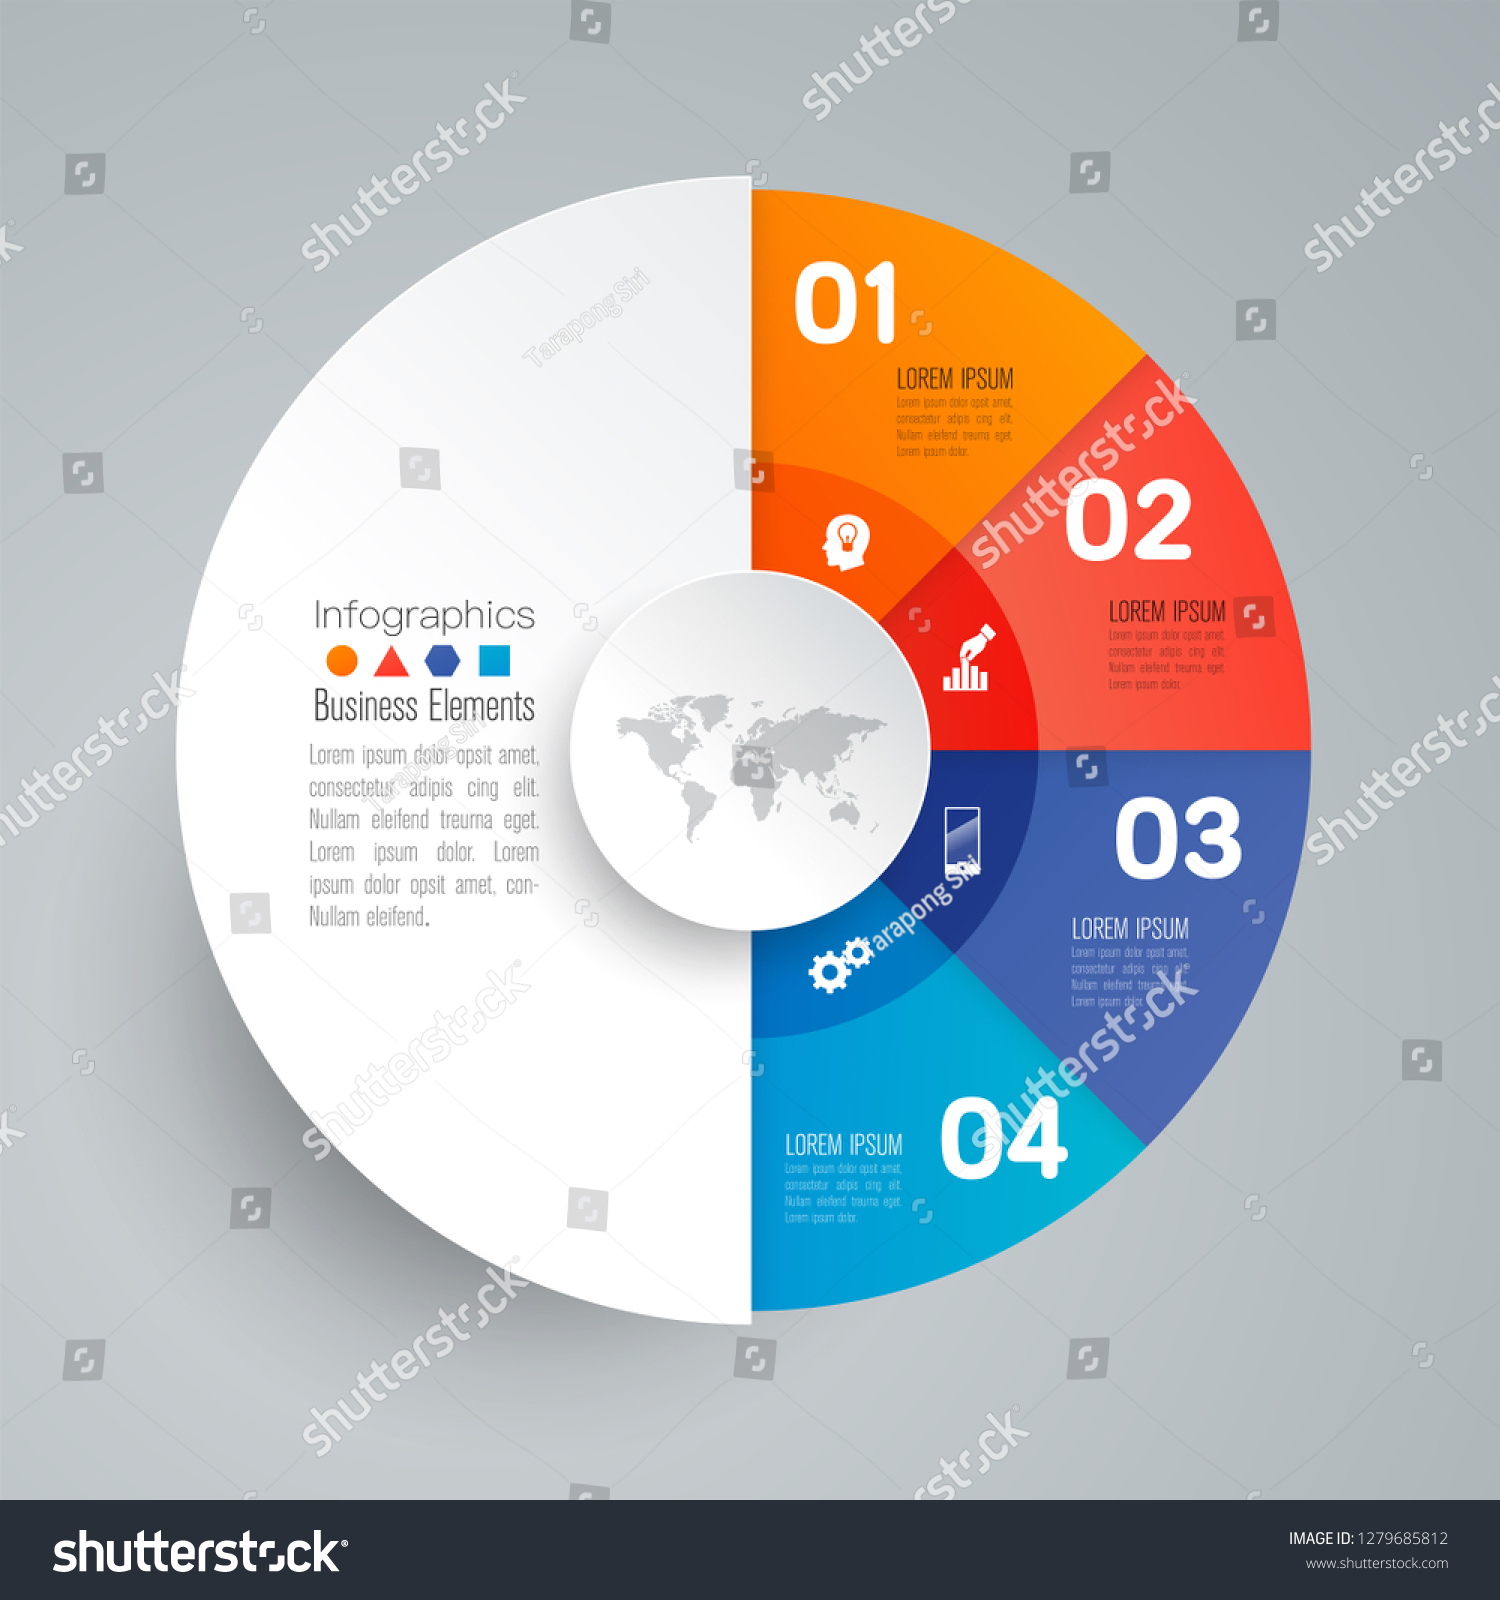 stock-vector-infographics-design-vector-and-marketing-icons-can-be-used-for-workflow-layout-diagram-annual-1279685812